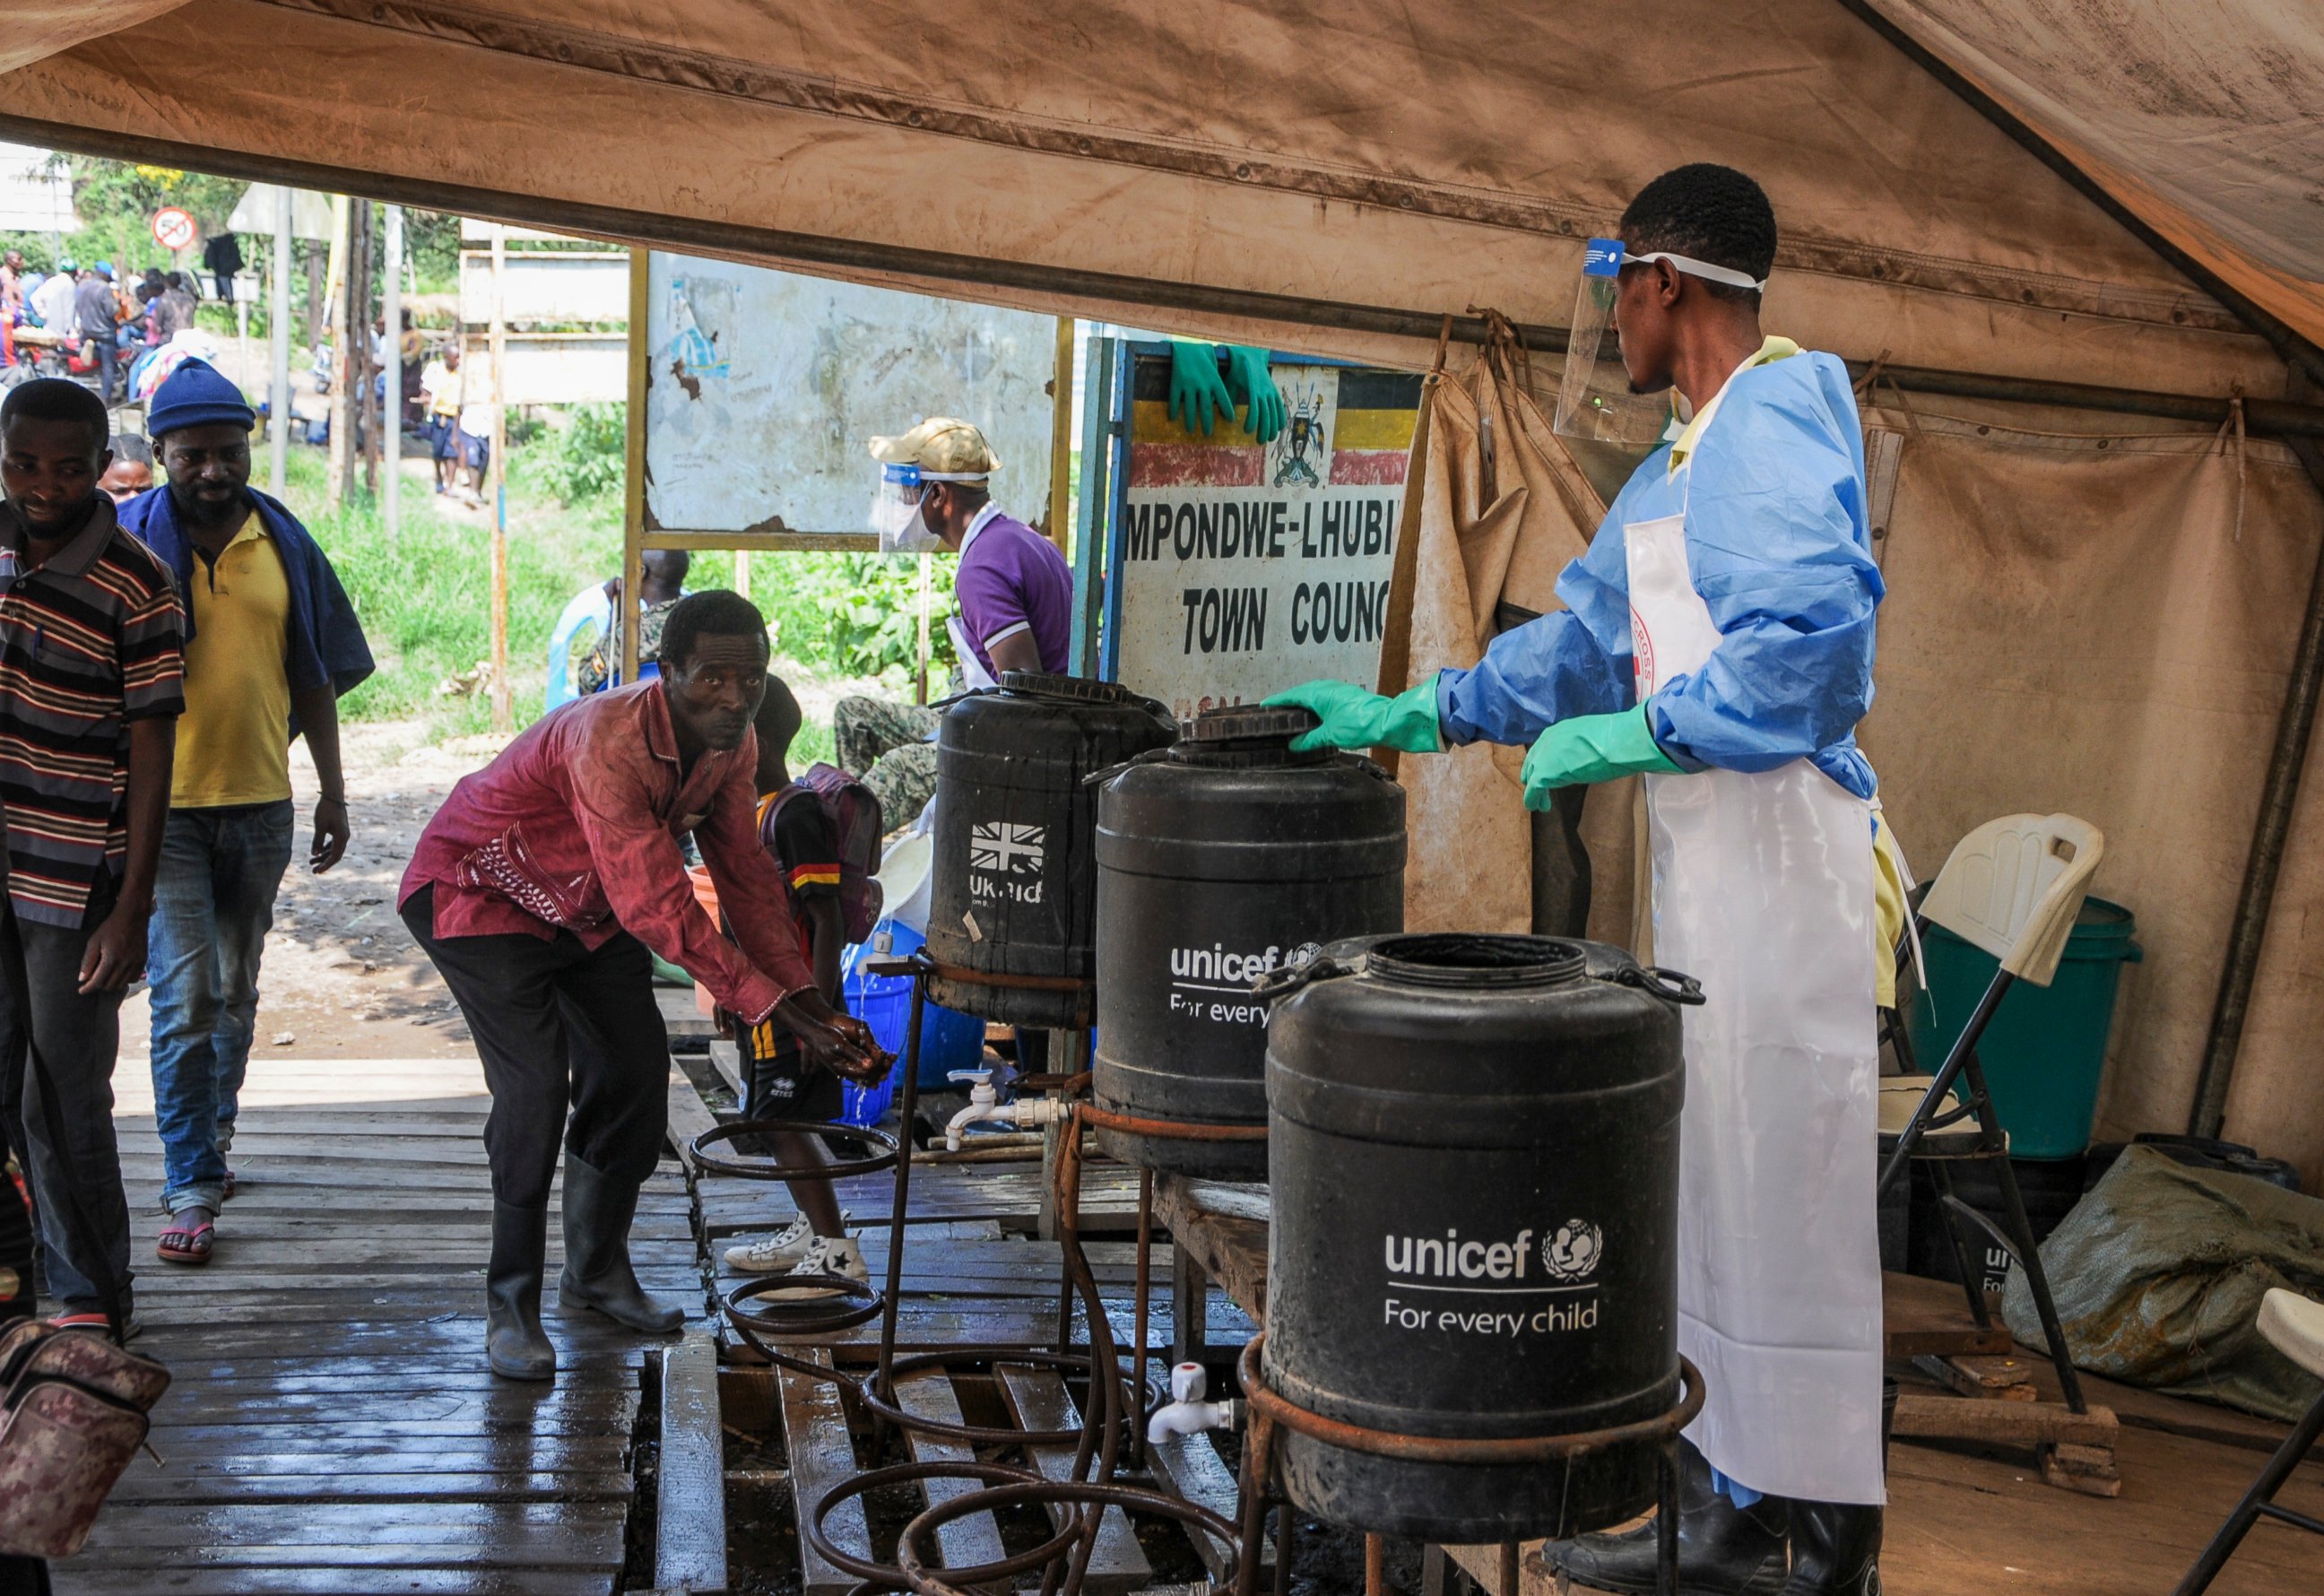 FILE - In this Friday, June 14, 2019 file photo, people coming from Congo wash their hands with chlorinated water to prevent the spread of Ebola infection, at the Mpondwe border crossing with Congo. Ugandan health authorities on Thursday, Aug. 29, 20